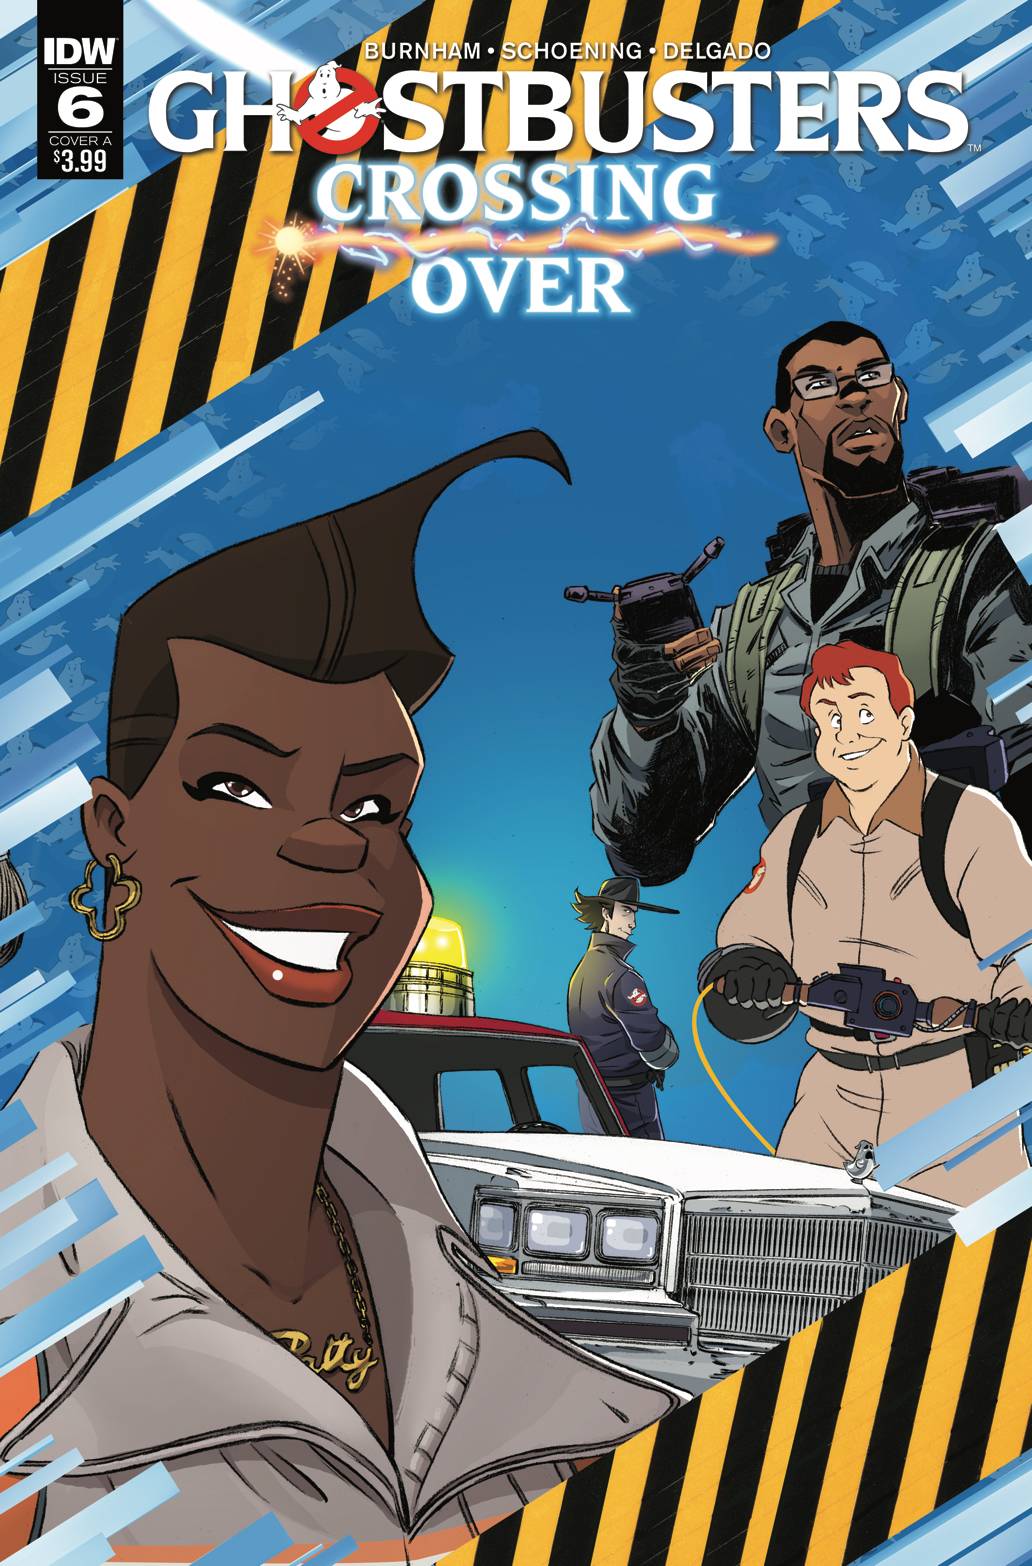 Ghostbusters Crossing Over #6 Cover A Schoening